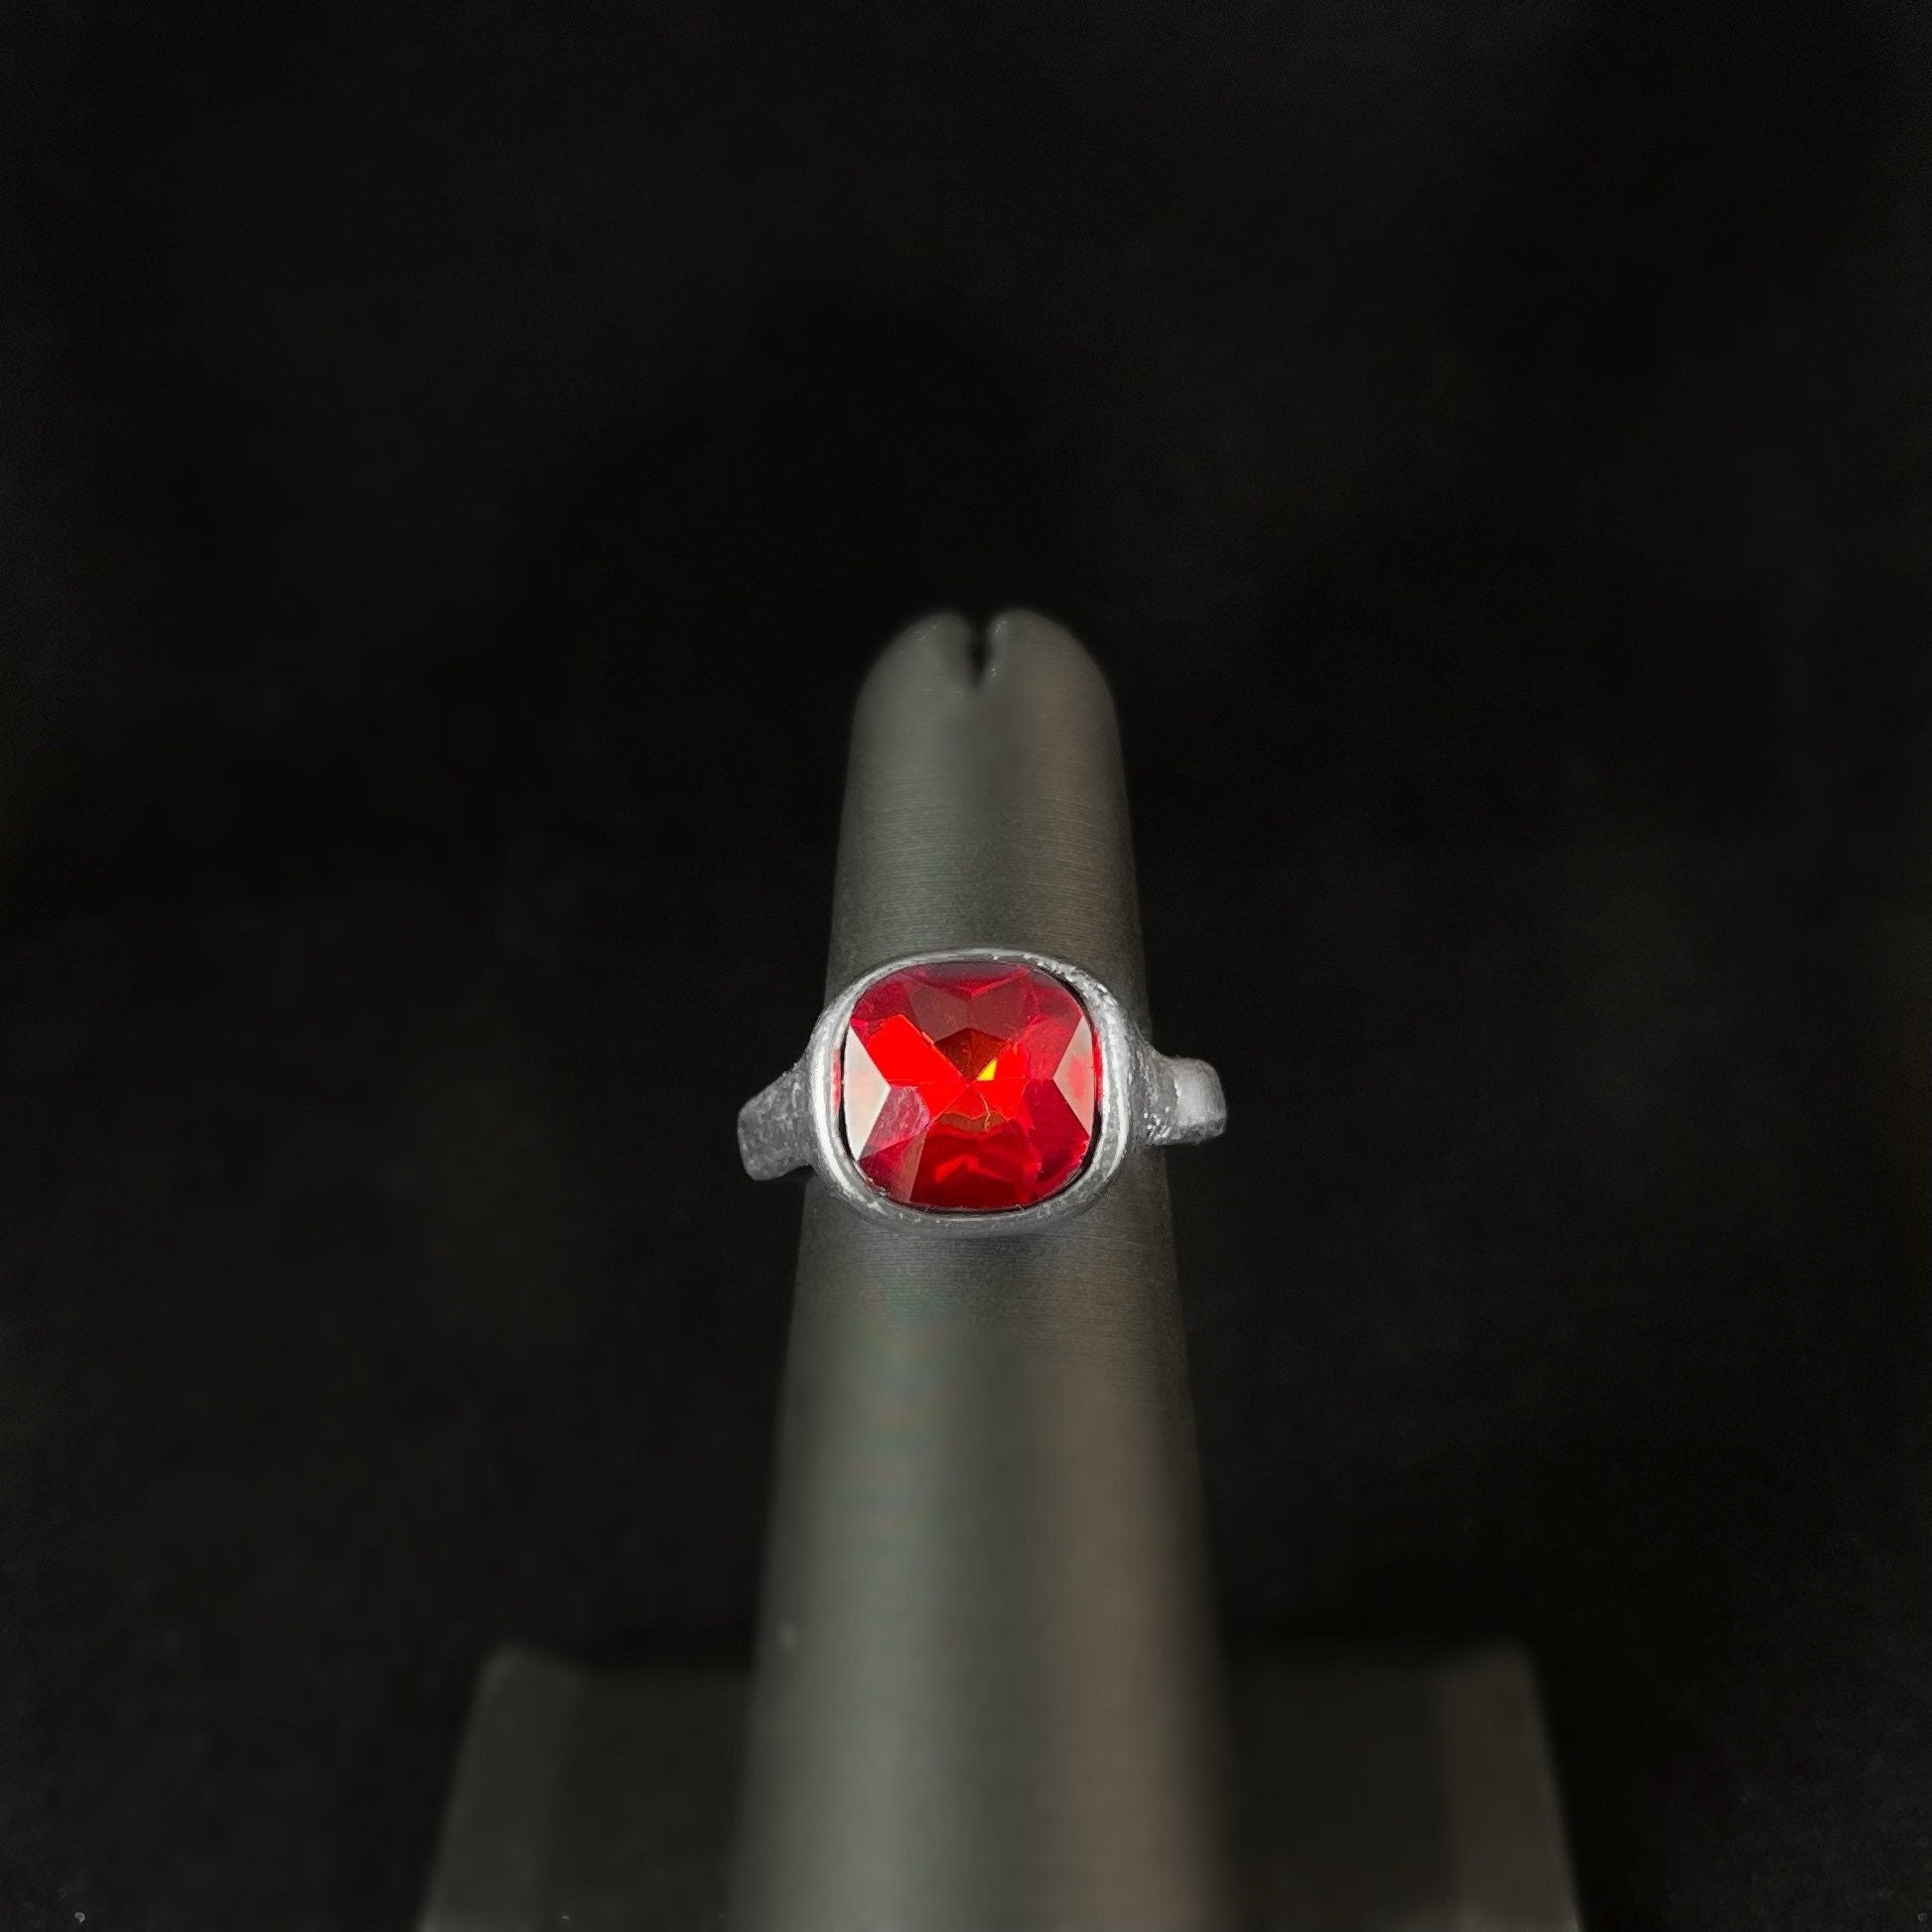 Silver Ring with Red Crystal, Handmade, Nickel Free